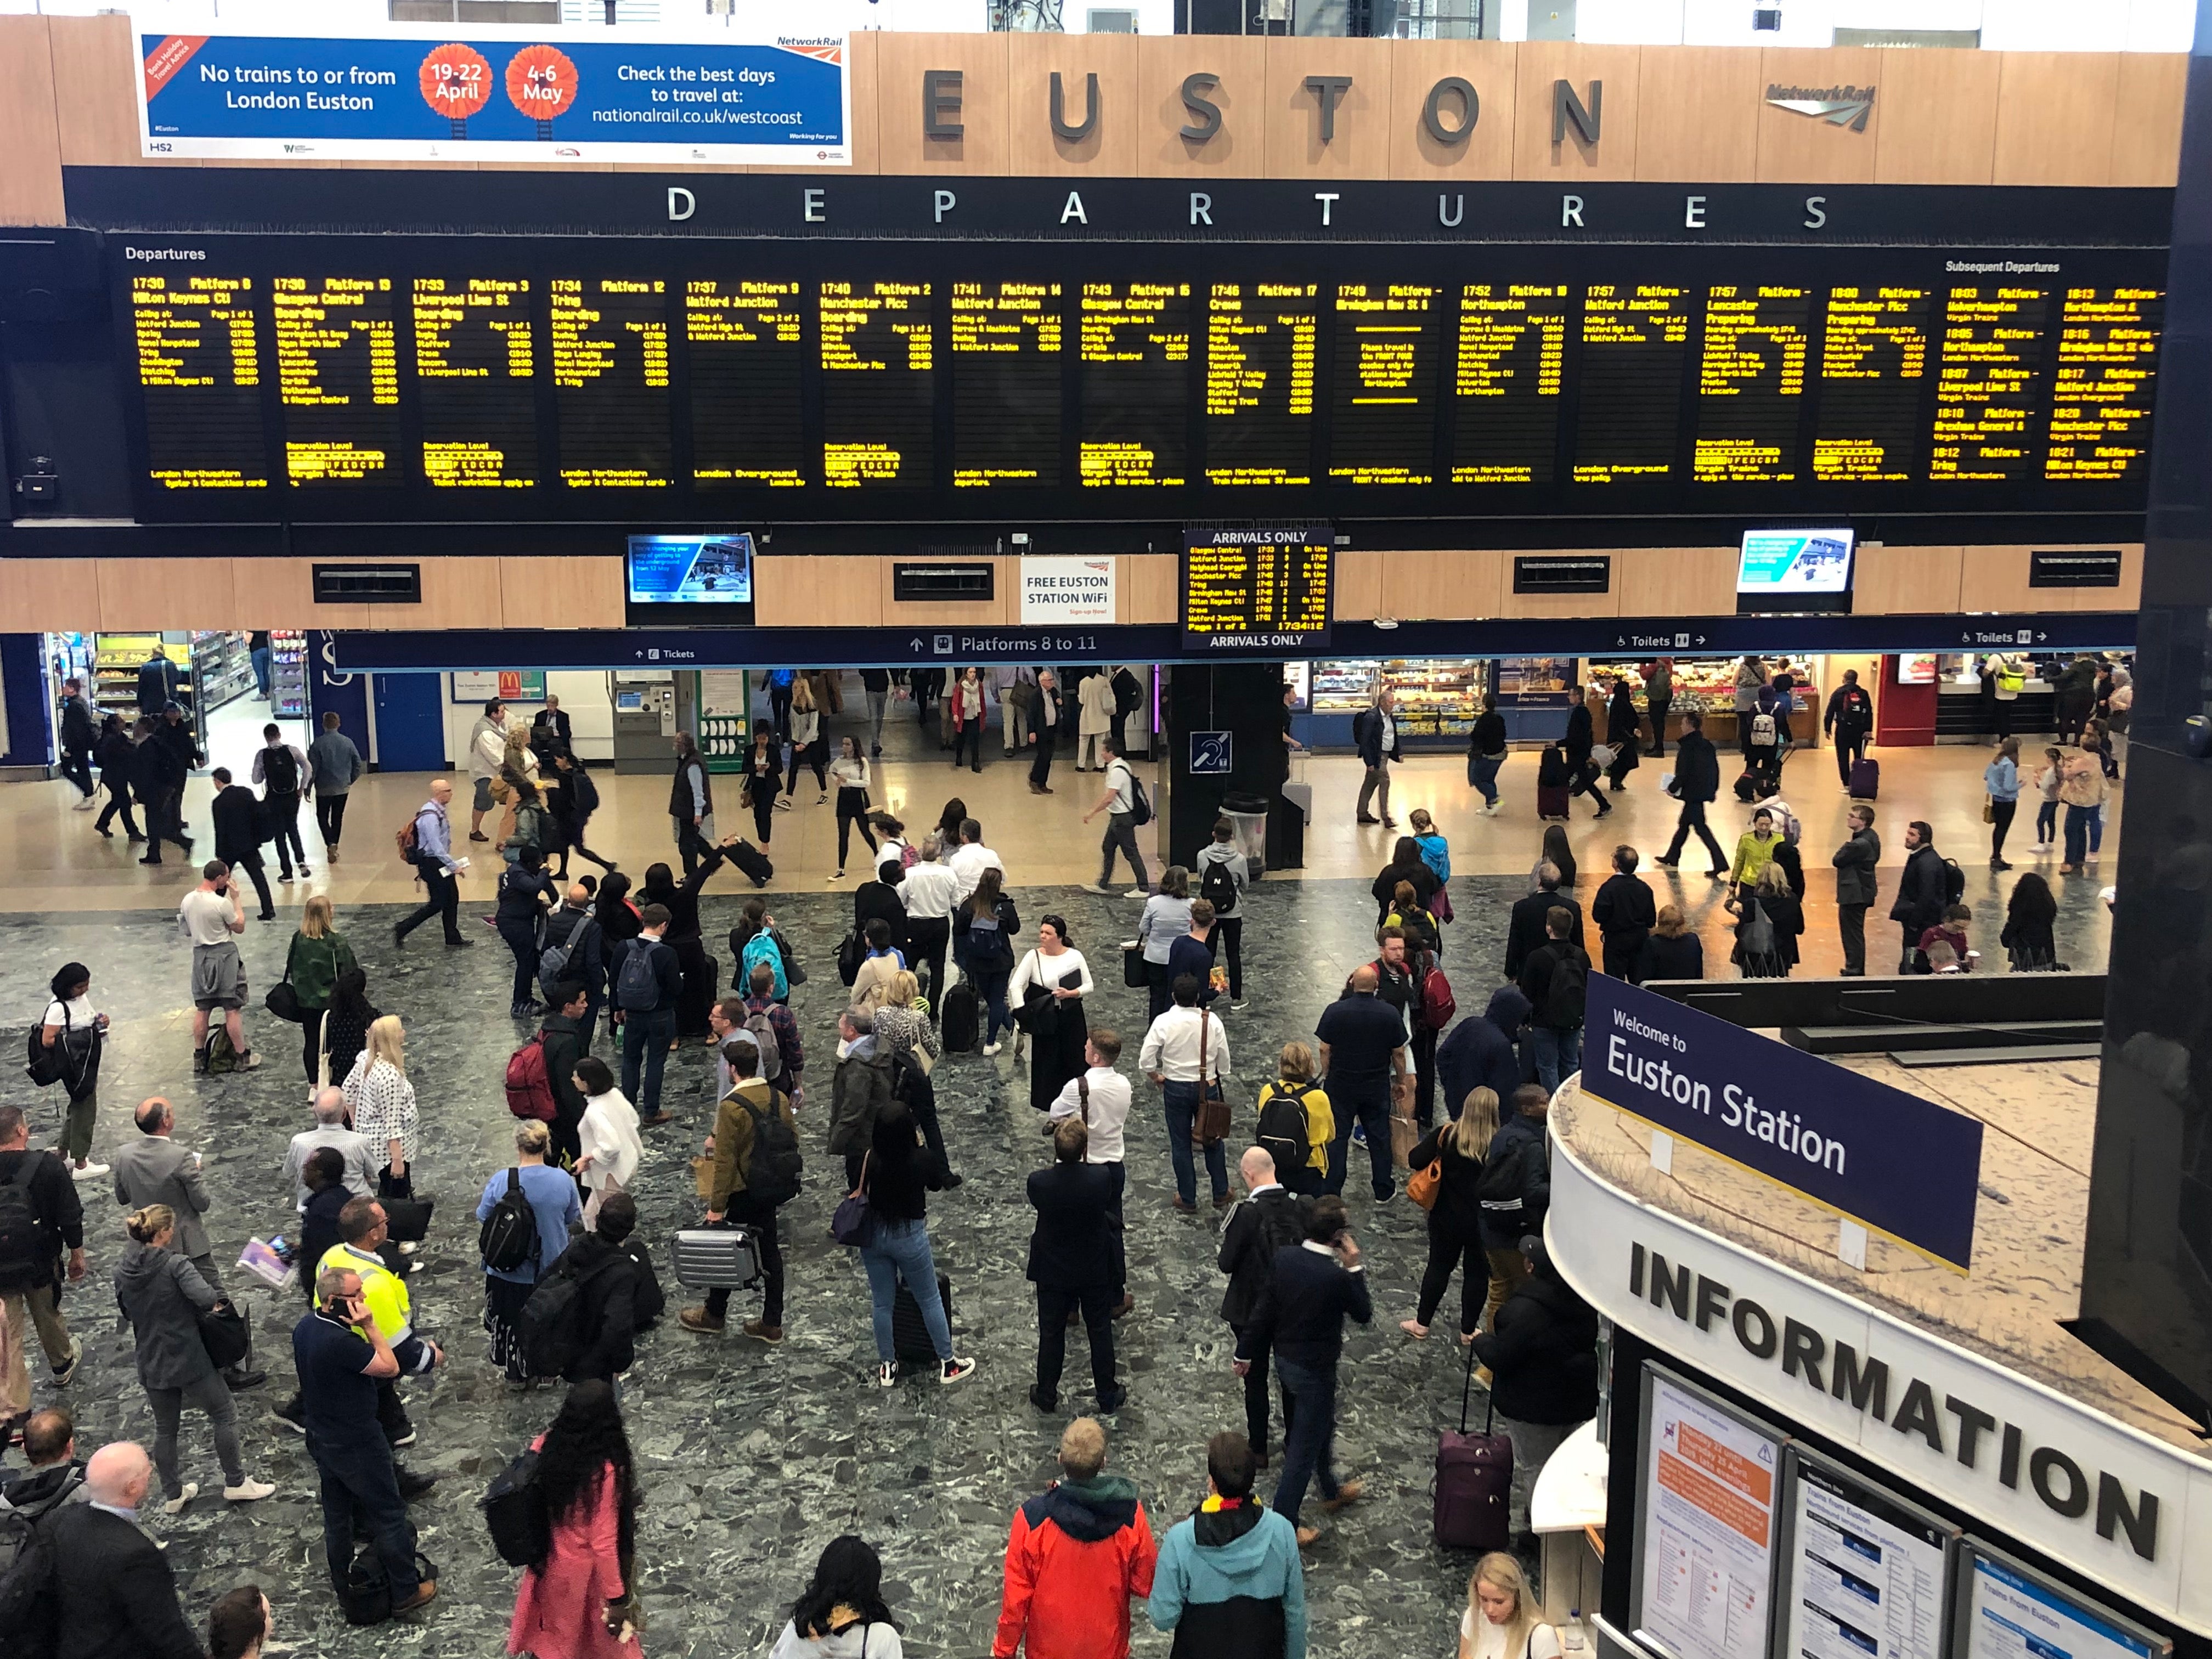 Closing soon: London Euston station will see no trains from Good Friday to Easter Monday